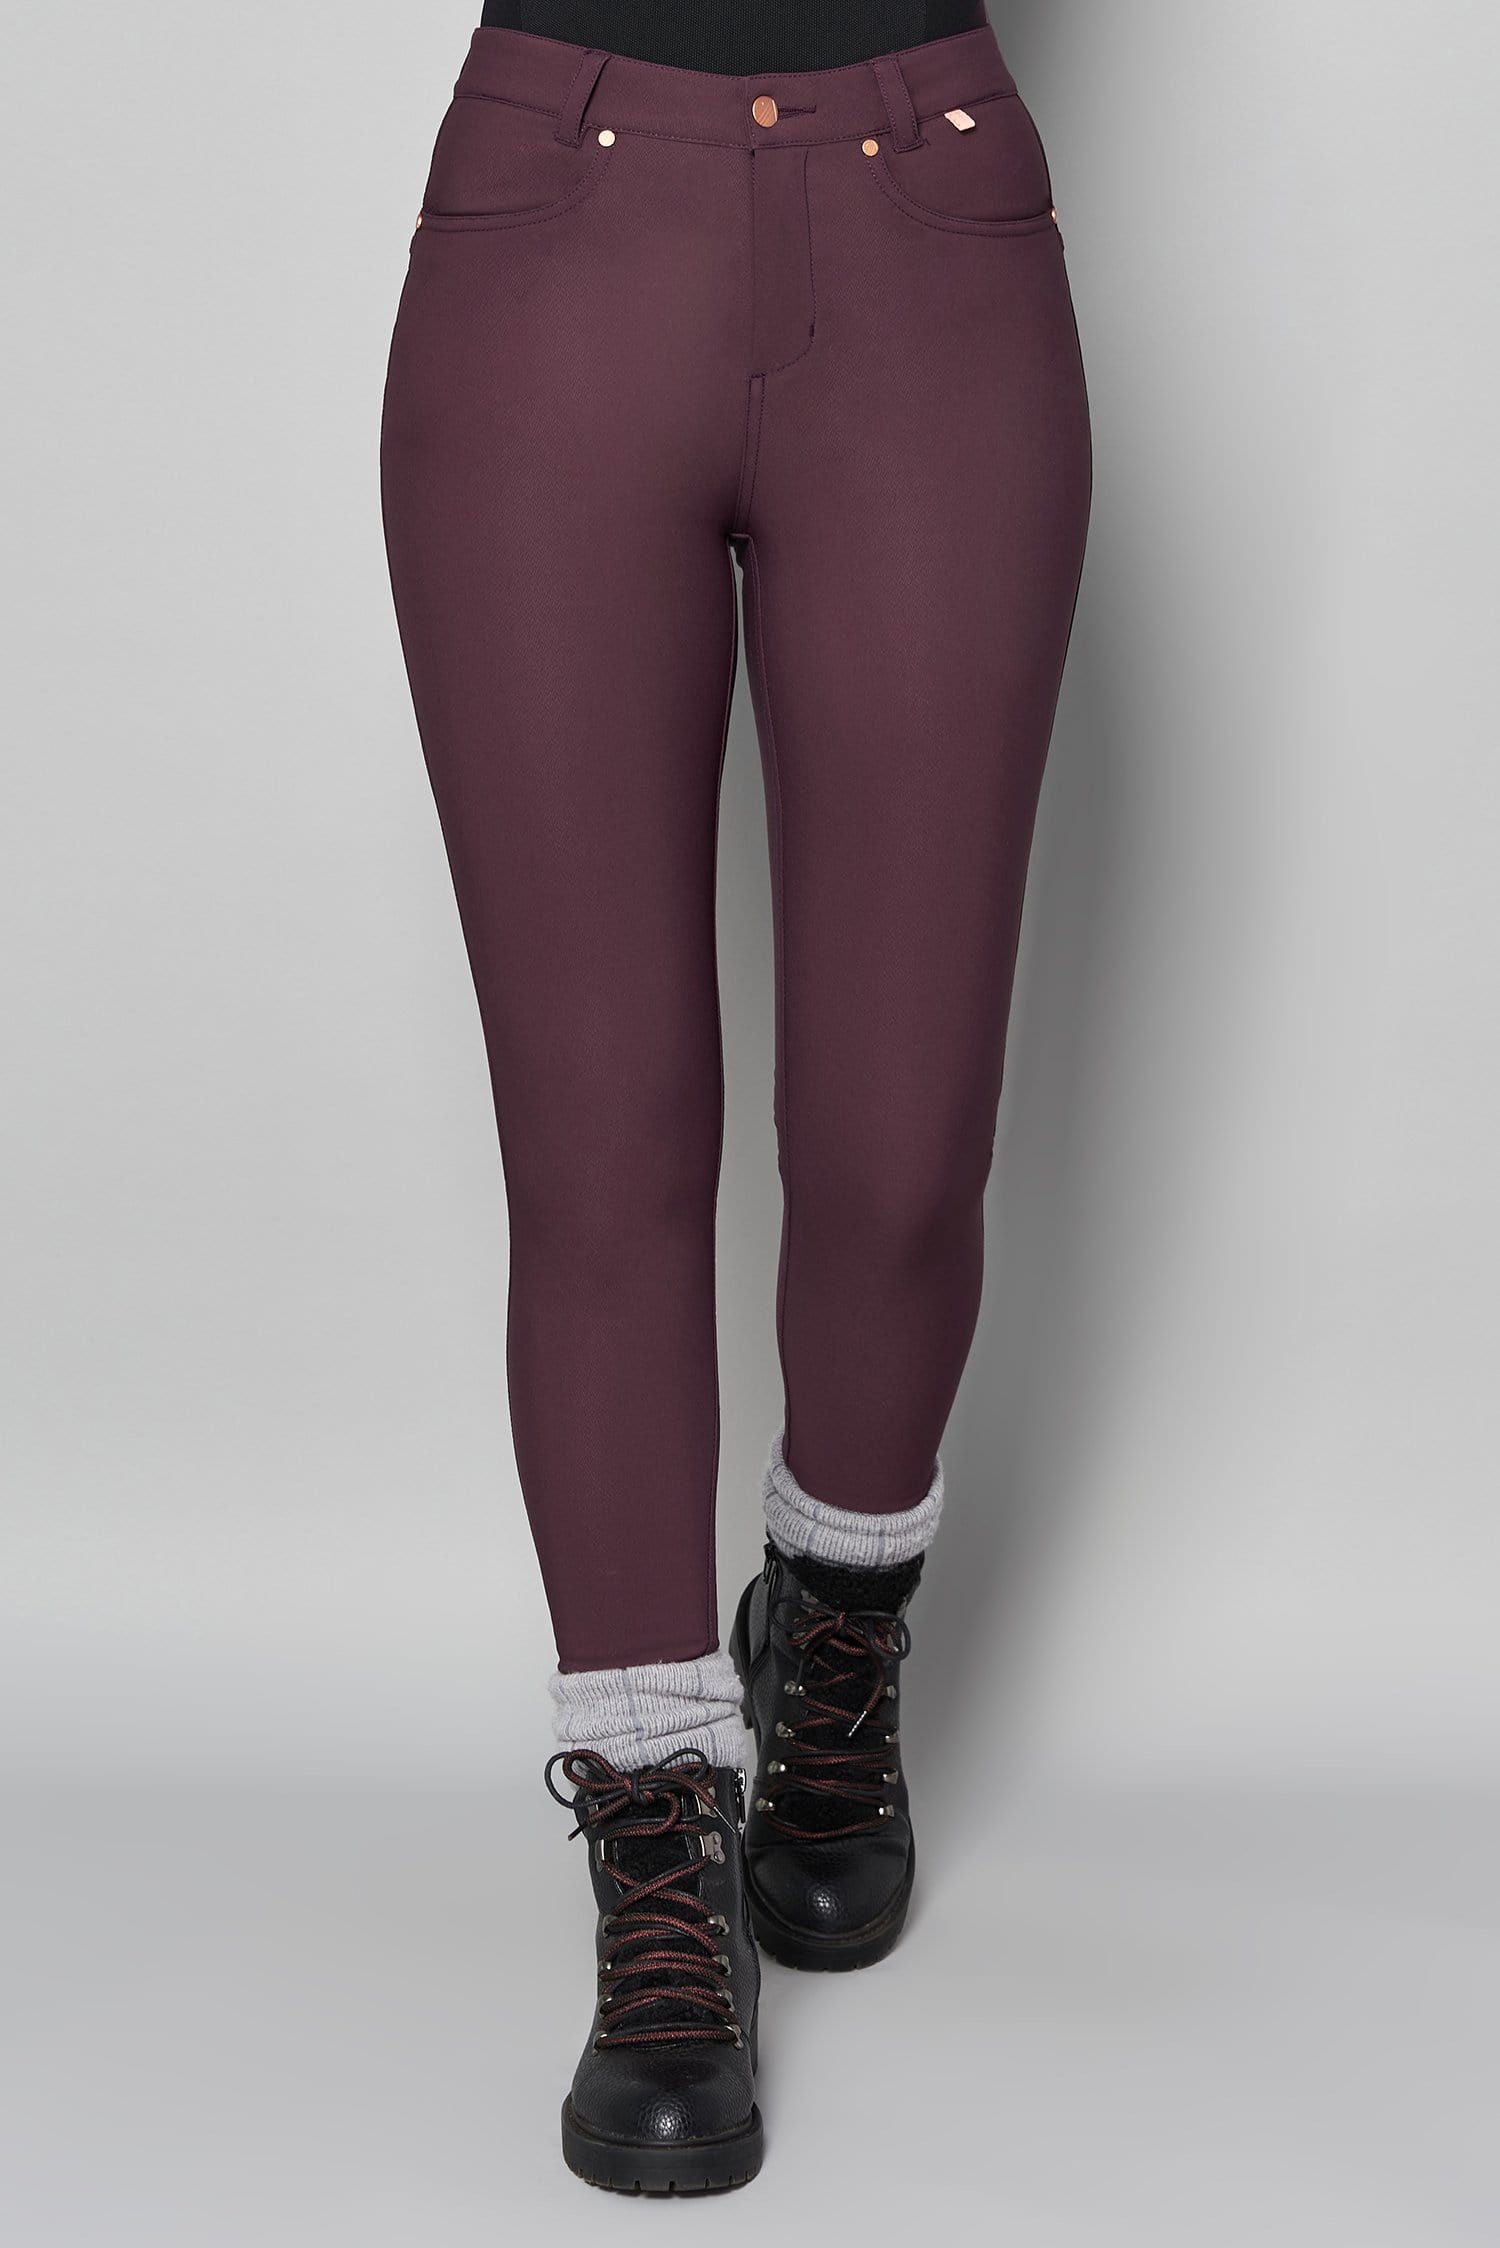 Thermal Skinny Outdoor Trousers - Aubergine - 32l / Uk14 - Womens - Acai Outdoorwear